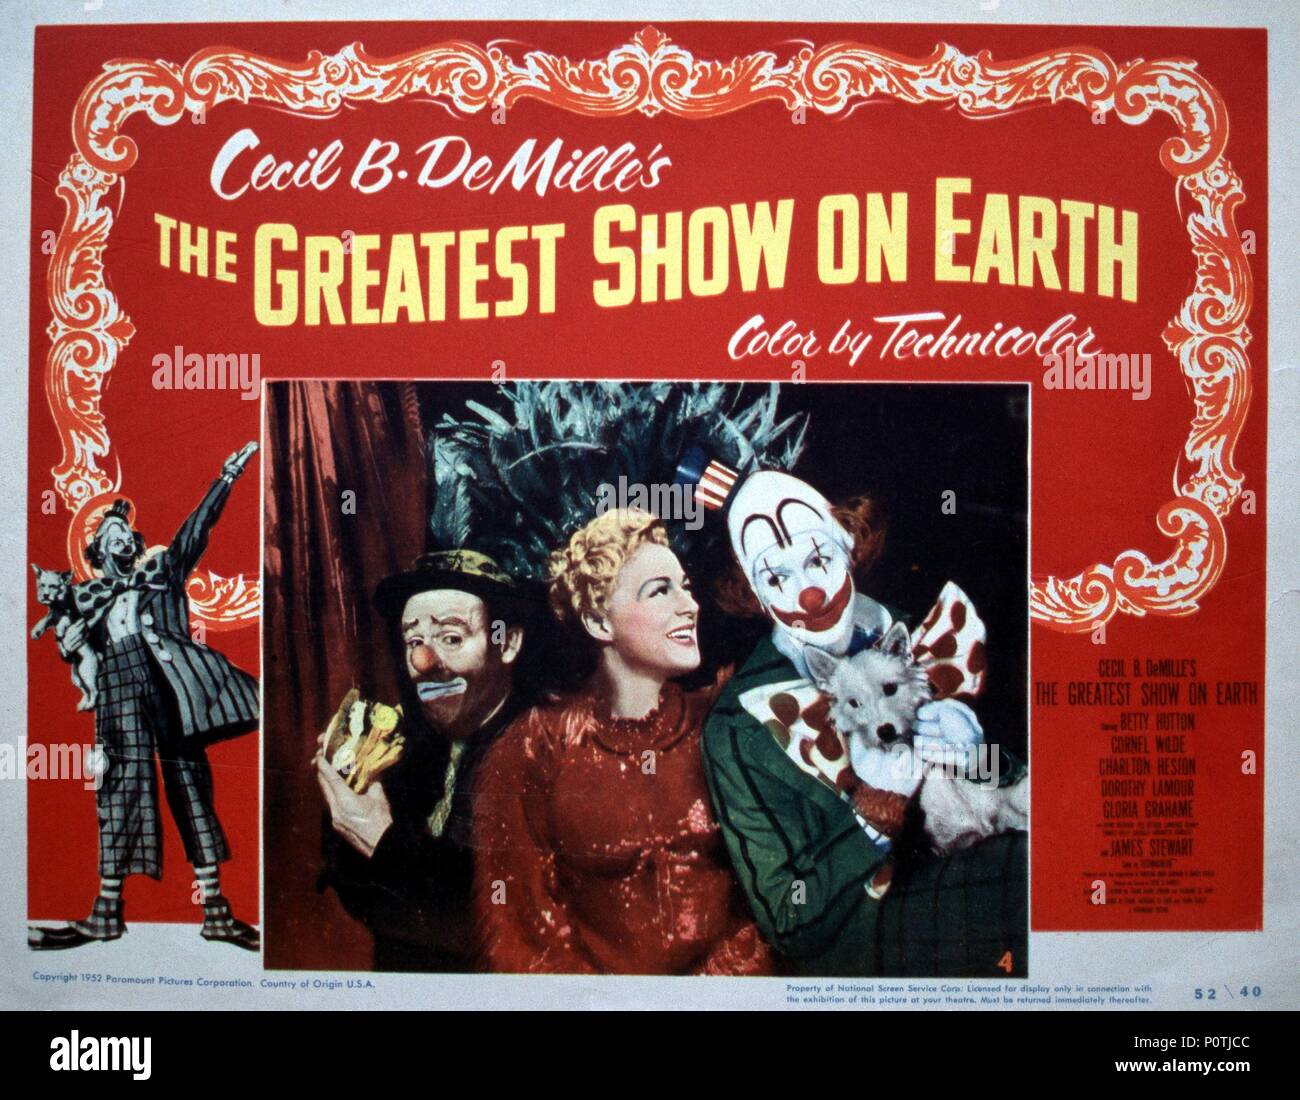 Original Film Title: THE GREATEST SHOW ON EARTH.  English Title: THE GREATEST SHOW ON EARTH.  Film Director: CECIL B DEMILLE.  Year: 1952. Credit: PARAMOUNT PICTURES / Album Stock Photo